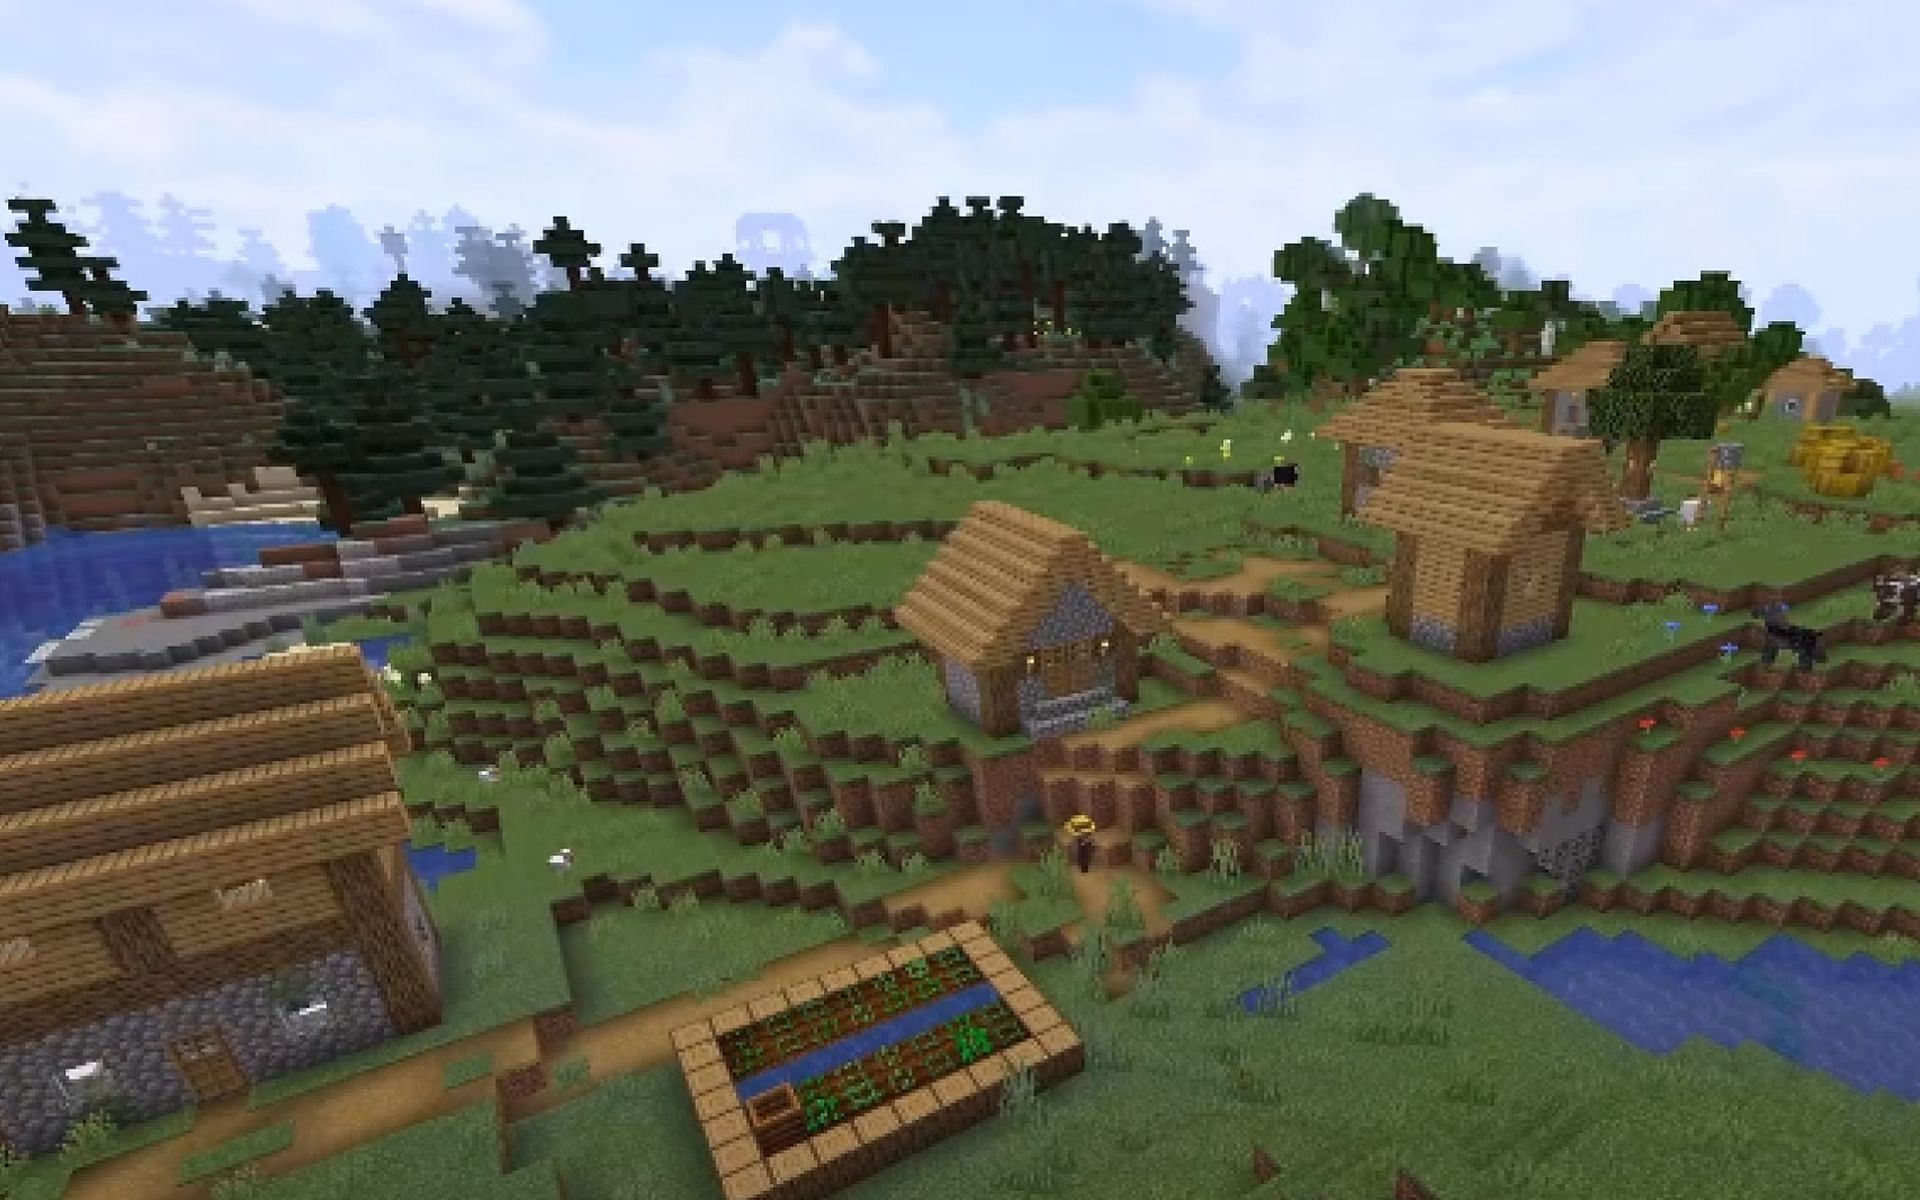 An image of a village in-game (Image via akirby80/YouTube)